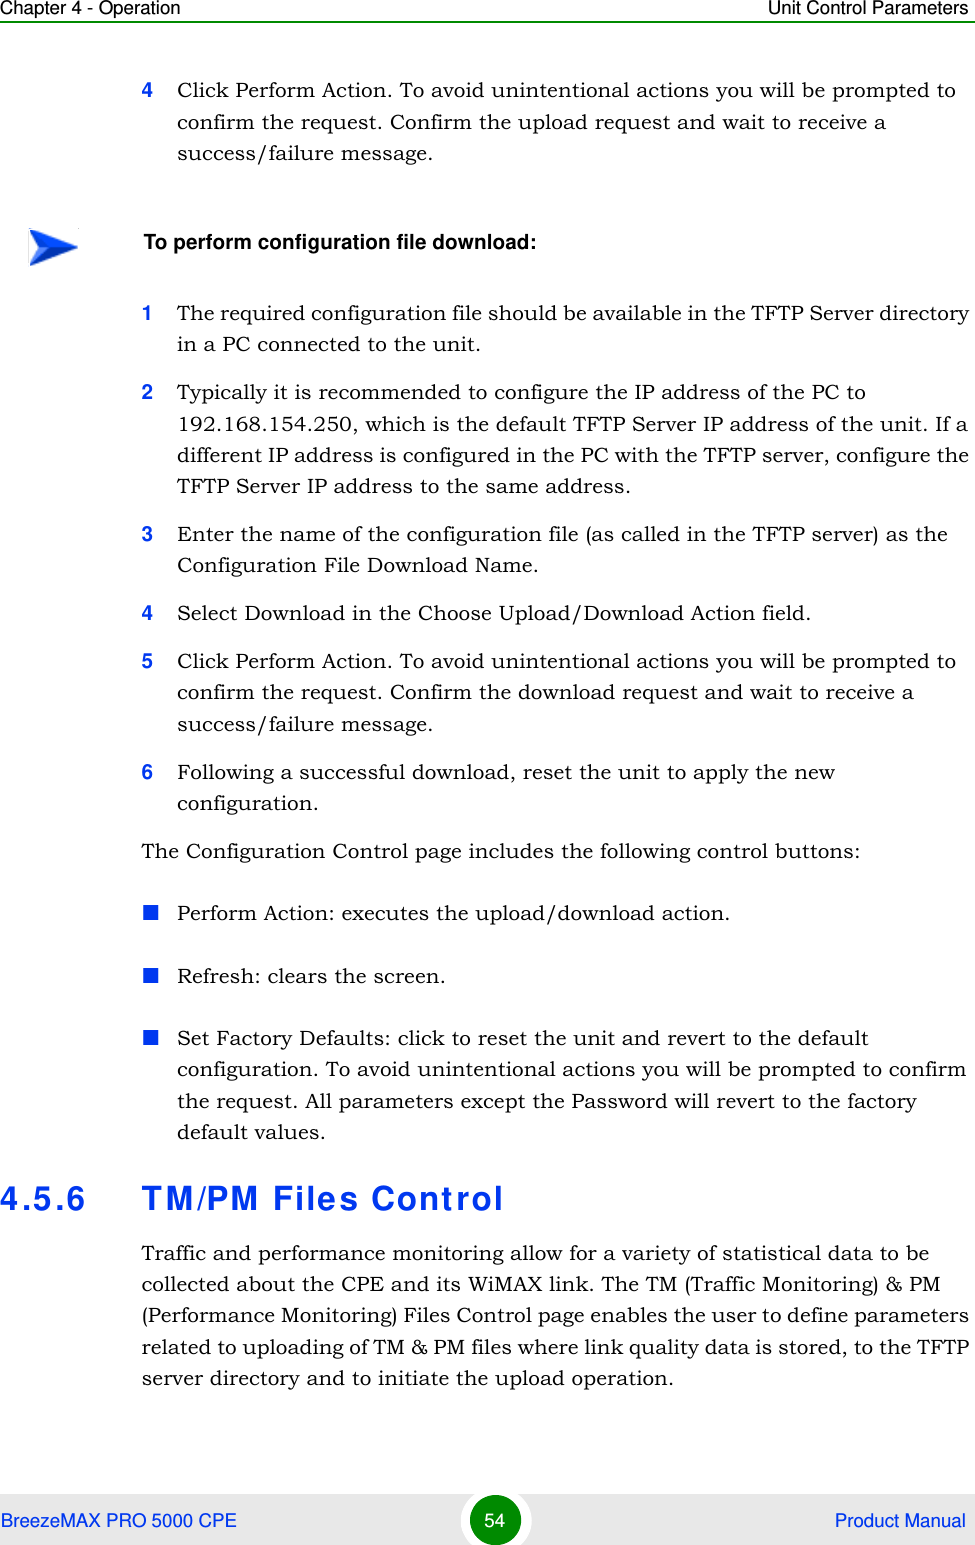 Chapter 4 - Operation Unit Control ParametersBreezeMAX PRO 5000 CPE 54  Product Manual4Click Perform Action. To avoid unintentional actions you will be prompted to confirm the request. Confirm the upload request and wait to receive a success/failure message.1The required configuration file should be available in the TFTP Server directory in a PC connected to the unit.2Typically it is recommended to configure the IP address of the PC to 192.168.154.250, which is the default TFTP Server IP address of the unit. If a different IP address is configured in the PC with the TFTP server, configure the TFTP Server IP address to the same address.3Enter the name of the configuration file (as called in the TFTP server) as the Configuration File Download Name.4Select Download in the Choose Upload/Download Action field.5Click Perform Action. To avoid unintentional actions you will be prompted to confirm the request. Confirm the download request and wait to receive a success/failure message.6Following a successful download, reset the unit to apply the new configuration.The Configuration Control page includes the following control buttons:Perform Action: executes the upload/download action.Refresh: clears the screen.Set Factory Defaults: click to reset the unit and revert to the default configuration. To avoid unintentional actions you will be prompted to confirm the request. All parameters except the Password will revert to the factory default values.4.5.6 TM/PM Files ControlTraffic and performance monitoring allow for a variety of statistical data to be collected about the CPE and its WiMAX link. The TM (Traffic Monitoring) &amp; PM (Performance Monitoring) Files Control page enables the user to define parameters related to uploading of TM &amp; PM files where link quality data is stored, to the TFTP server directory and to initiate the upload operation.To perform configuration file download: